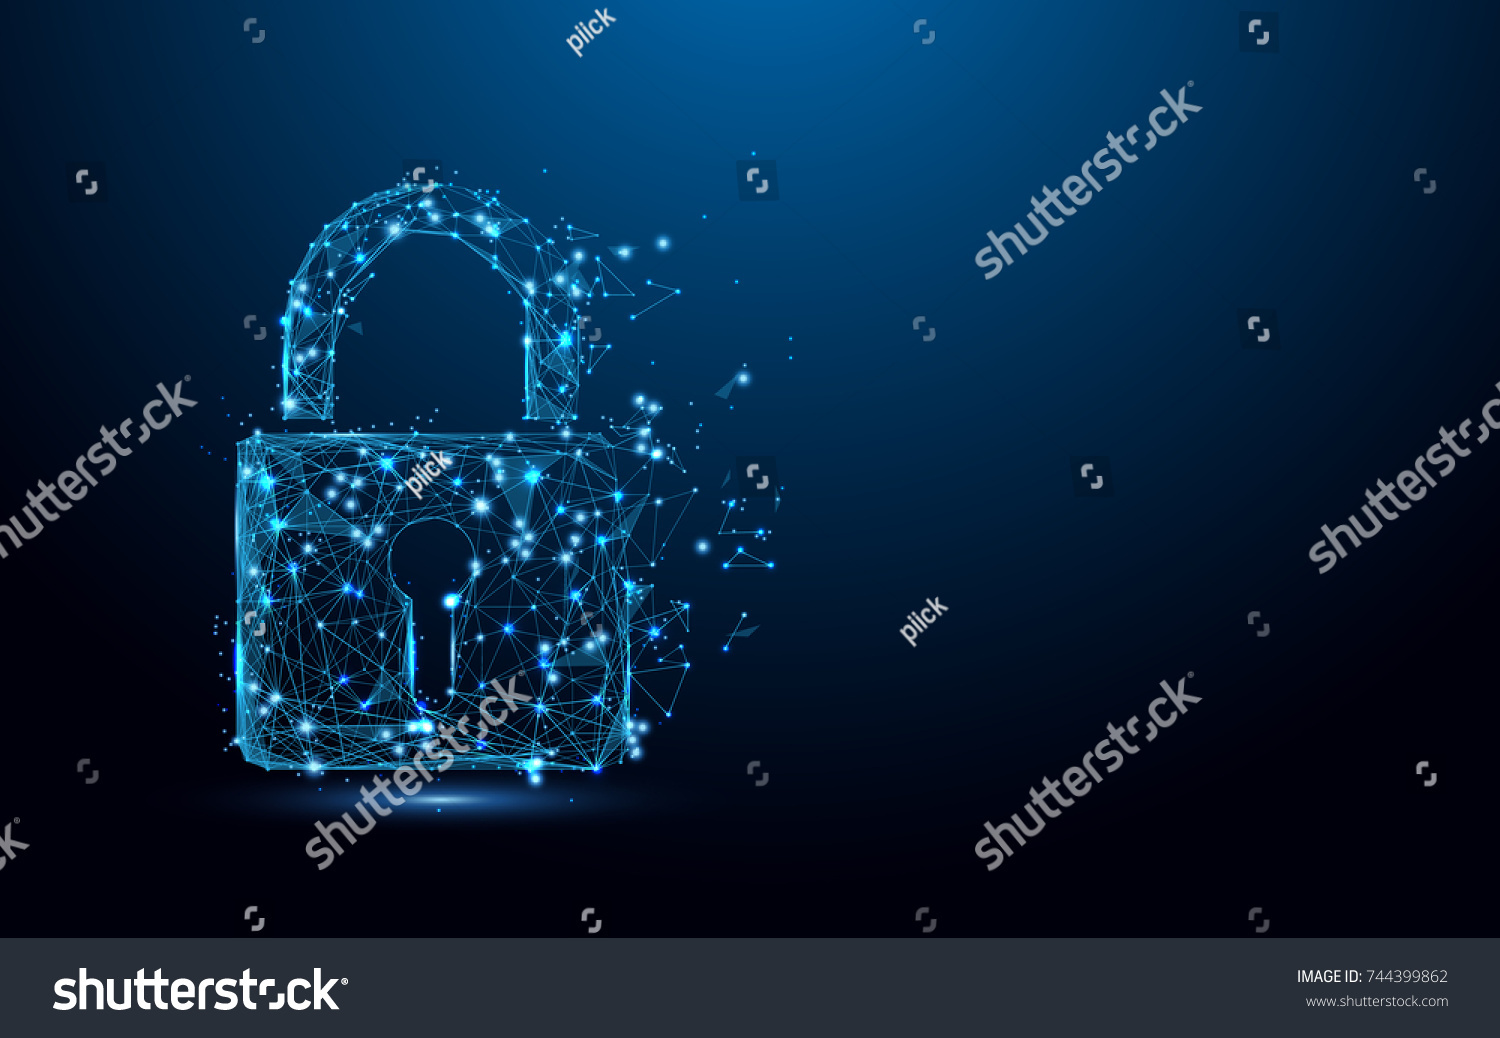 Cyber security concept. Lock symbol from lines and triangles, point connecting network on blue background. Illustration vector #744399862